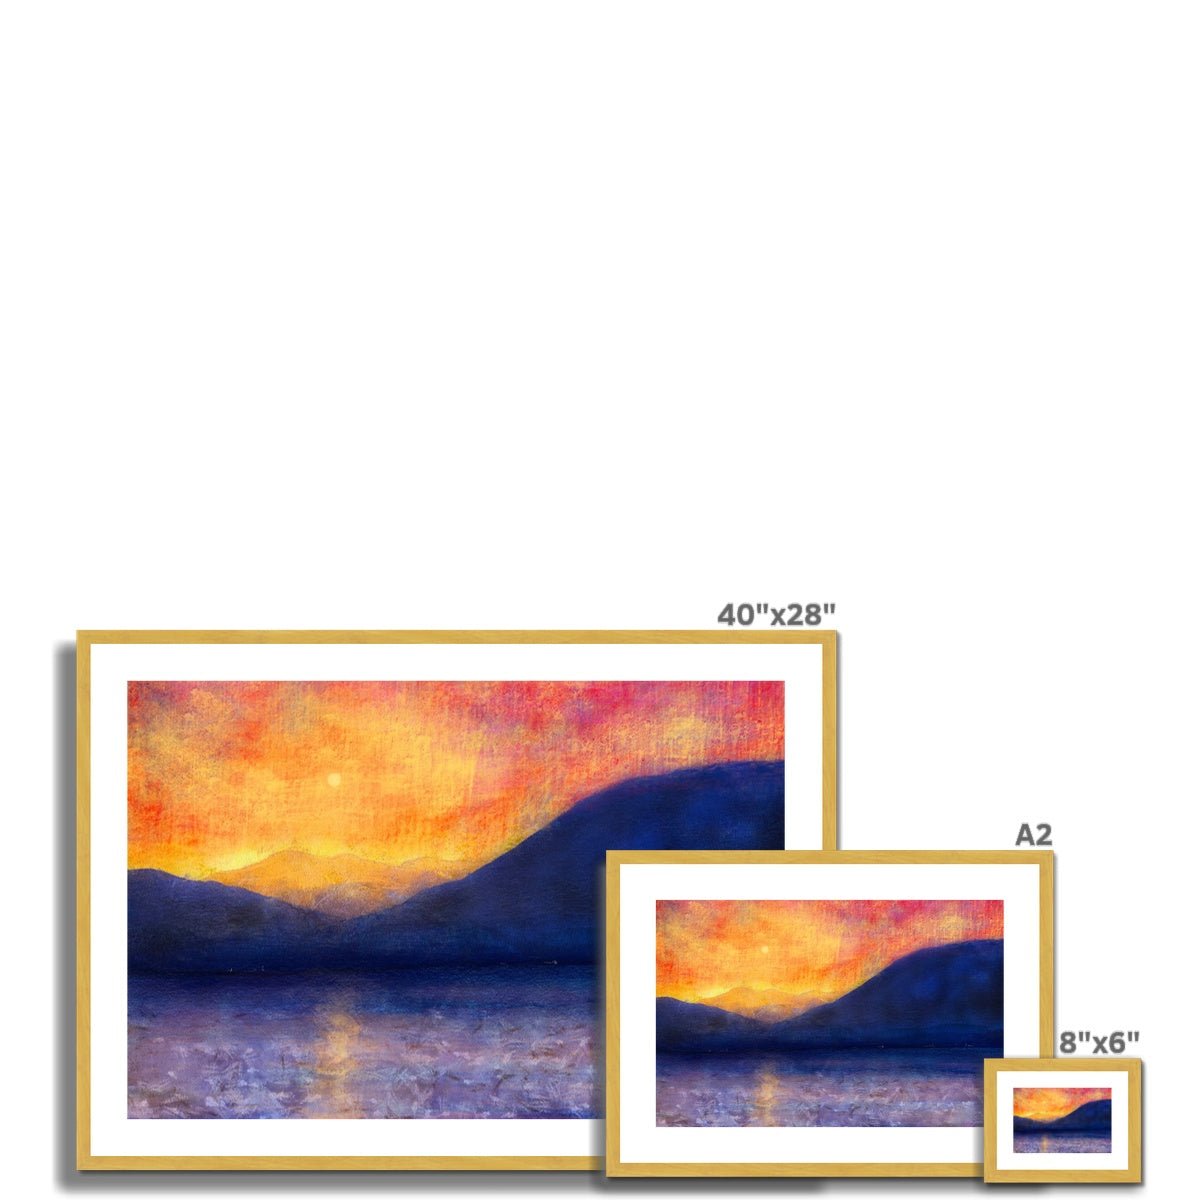 Sunset Approaching Mull Painting | Antique Framed & Mounted Prints From Scotland-Antique Framed & Mounted Prints-Hebridean Islands Art Gallery-Paintings, Prints, Homeware, Art Gifts From Scotland By Scottish Artist Kevin Hunter